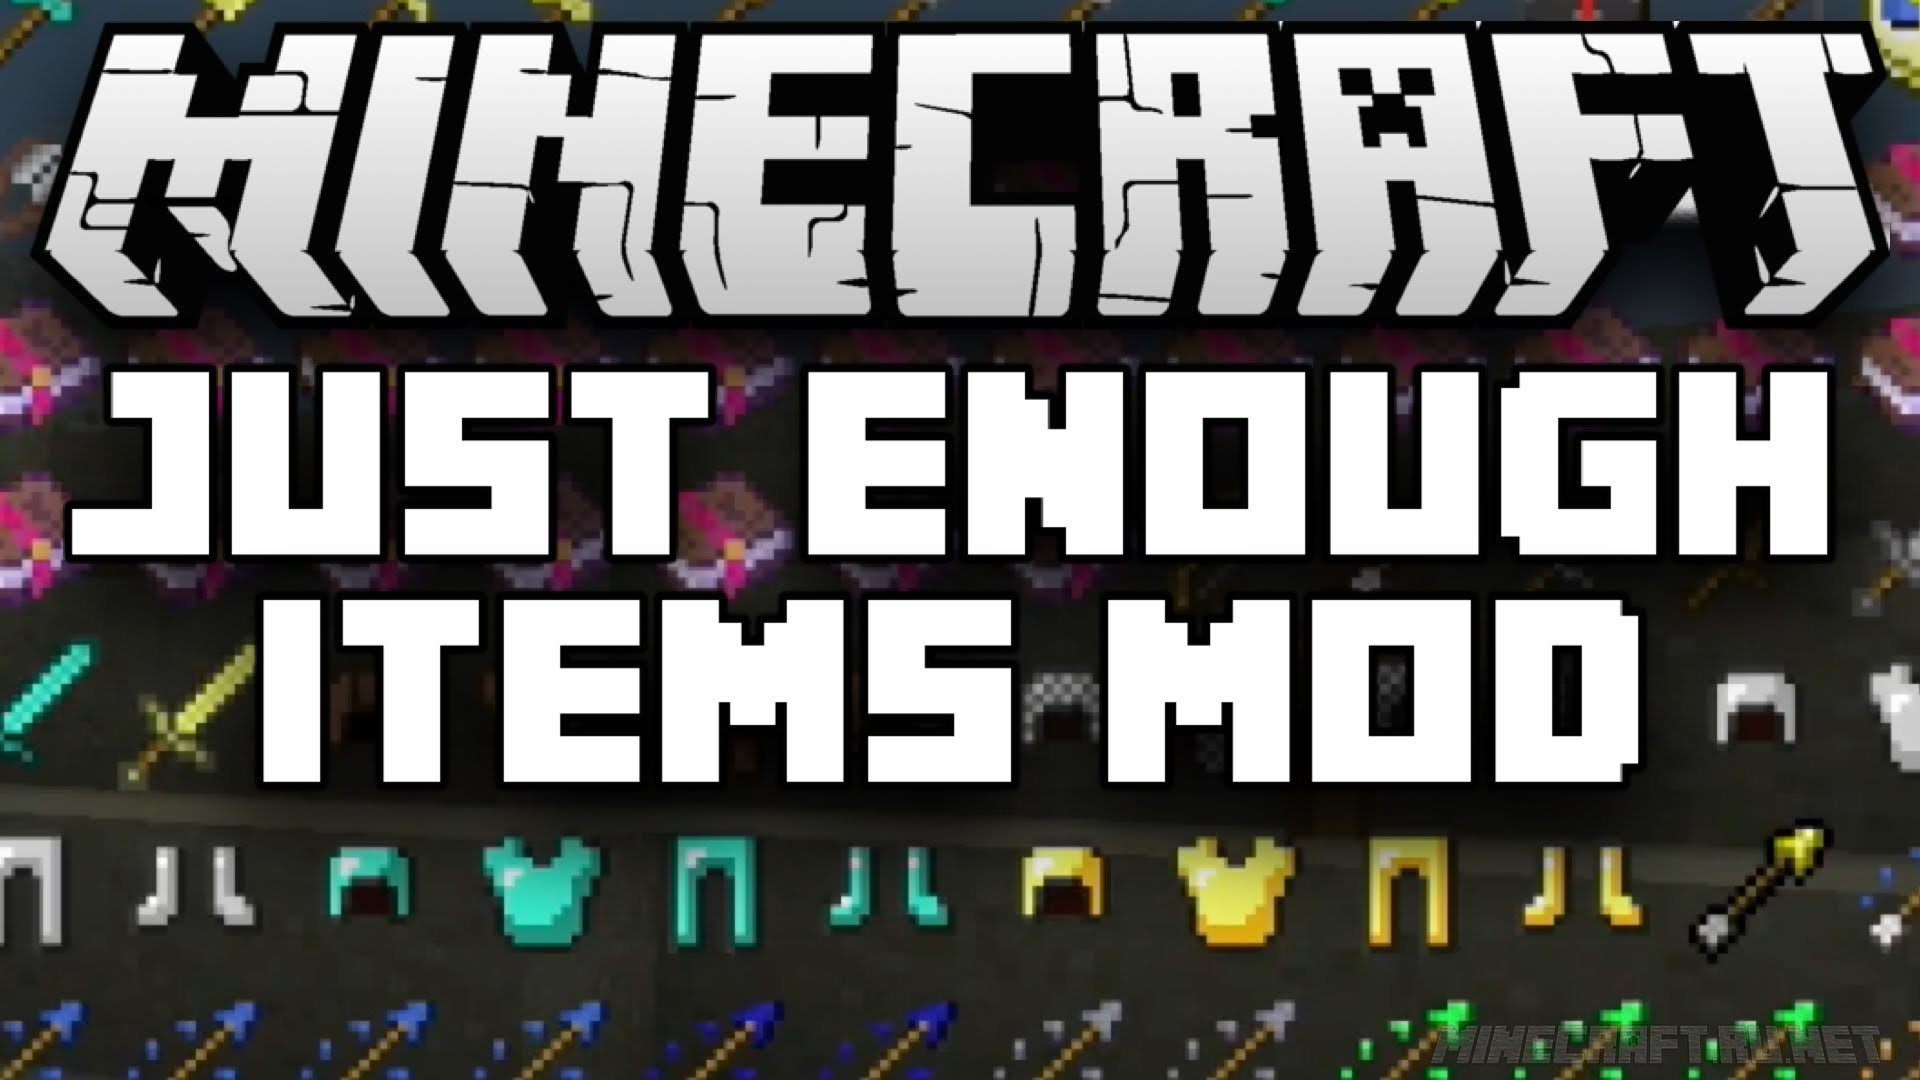 minecraft 1.7.10 just enough items mod